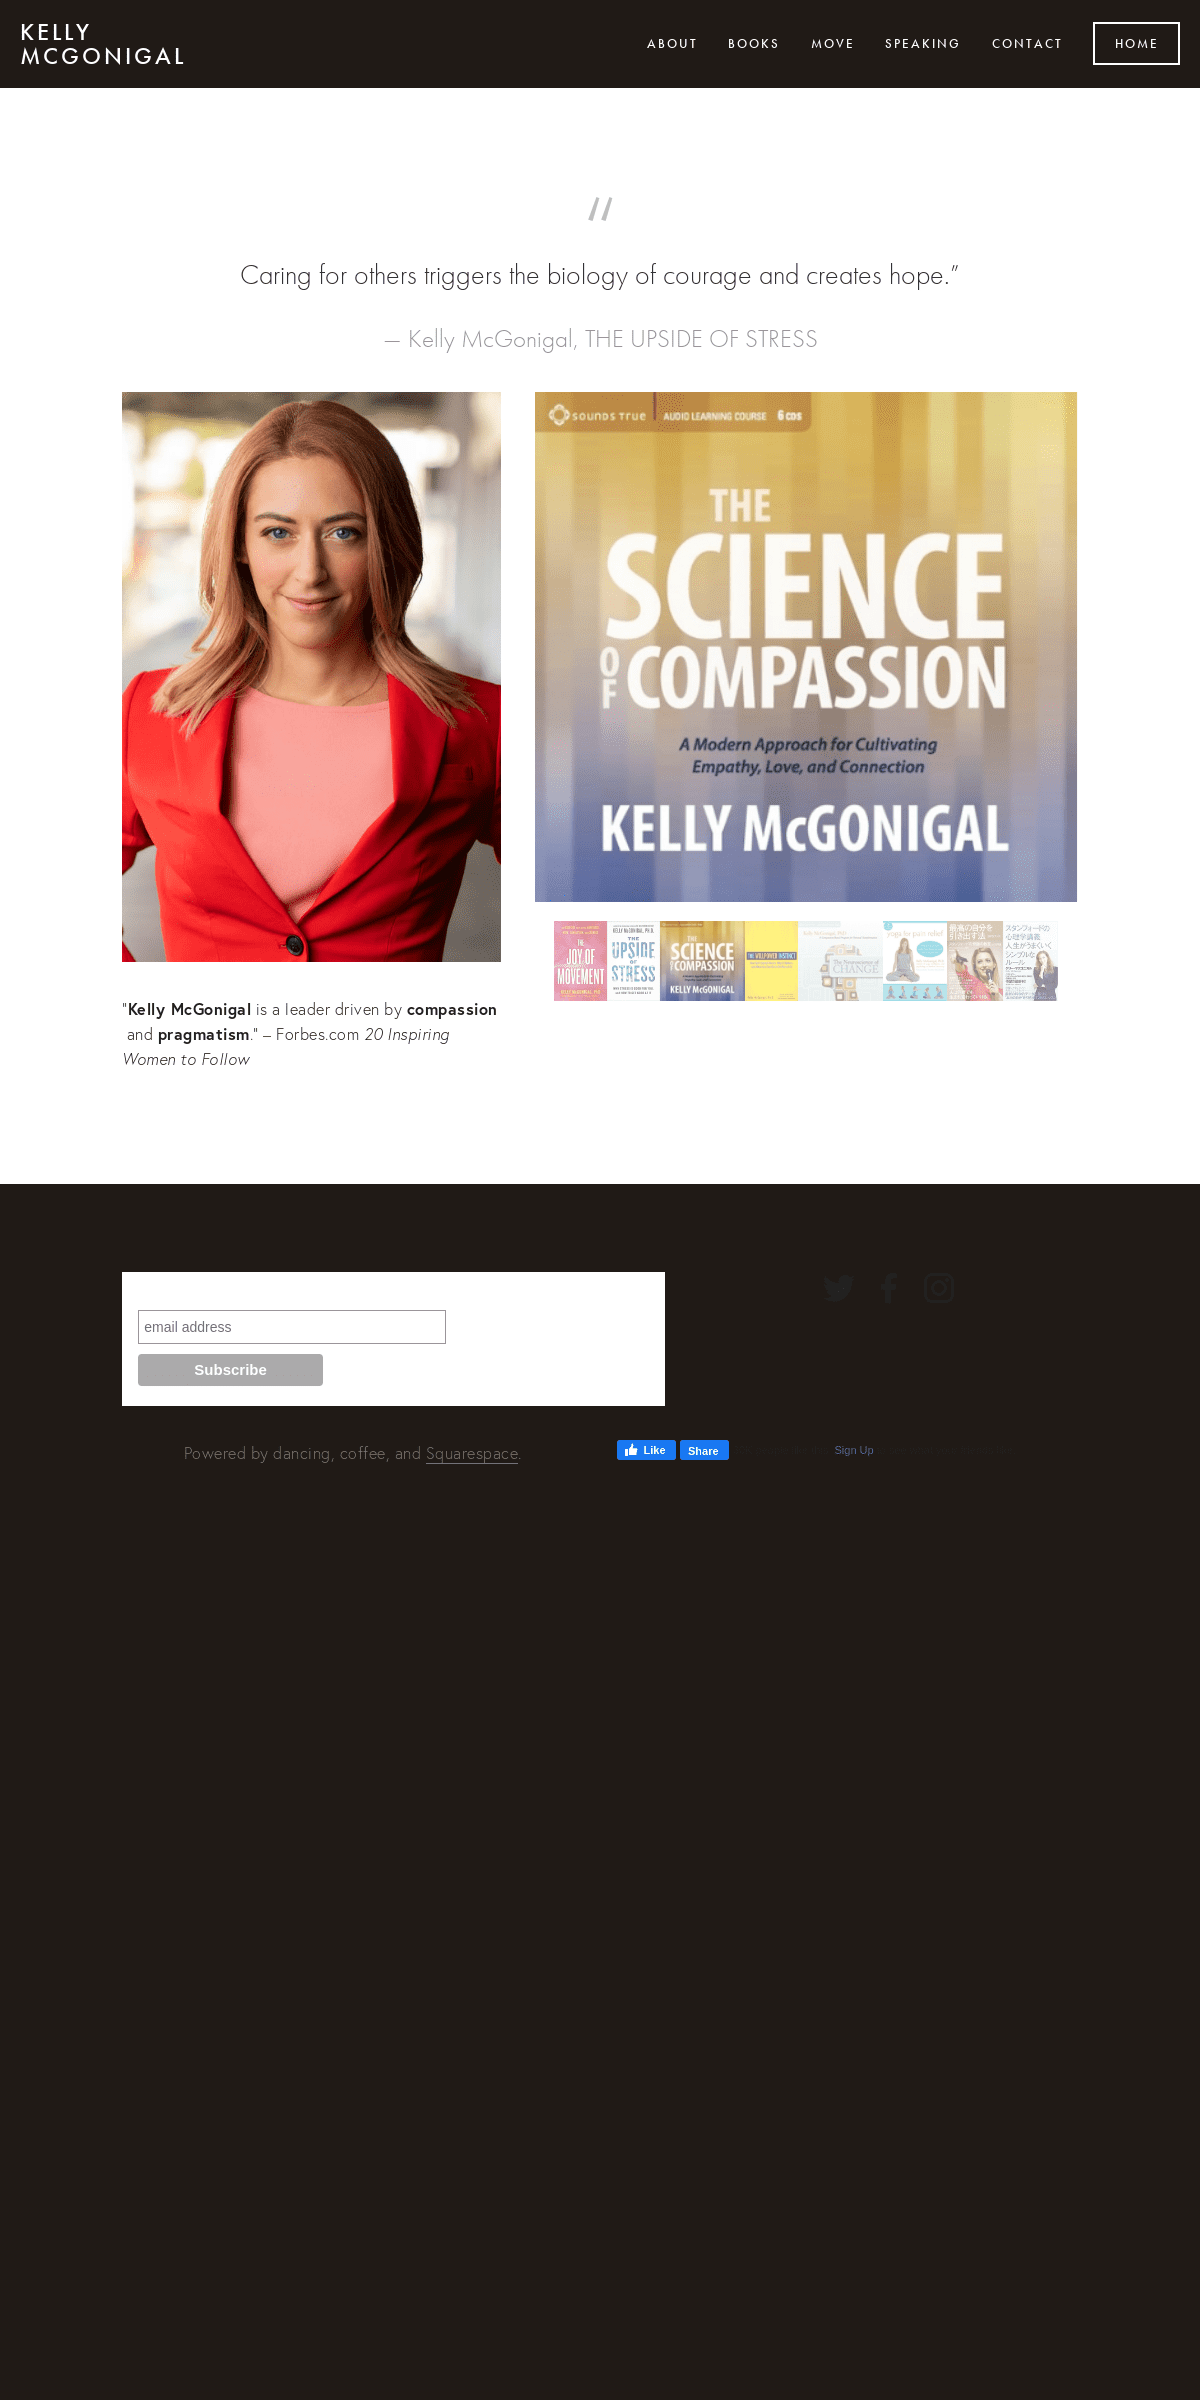 A complete backup of kellymcgonigal.com